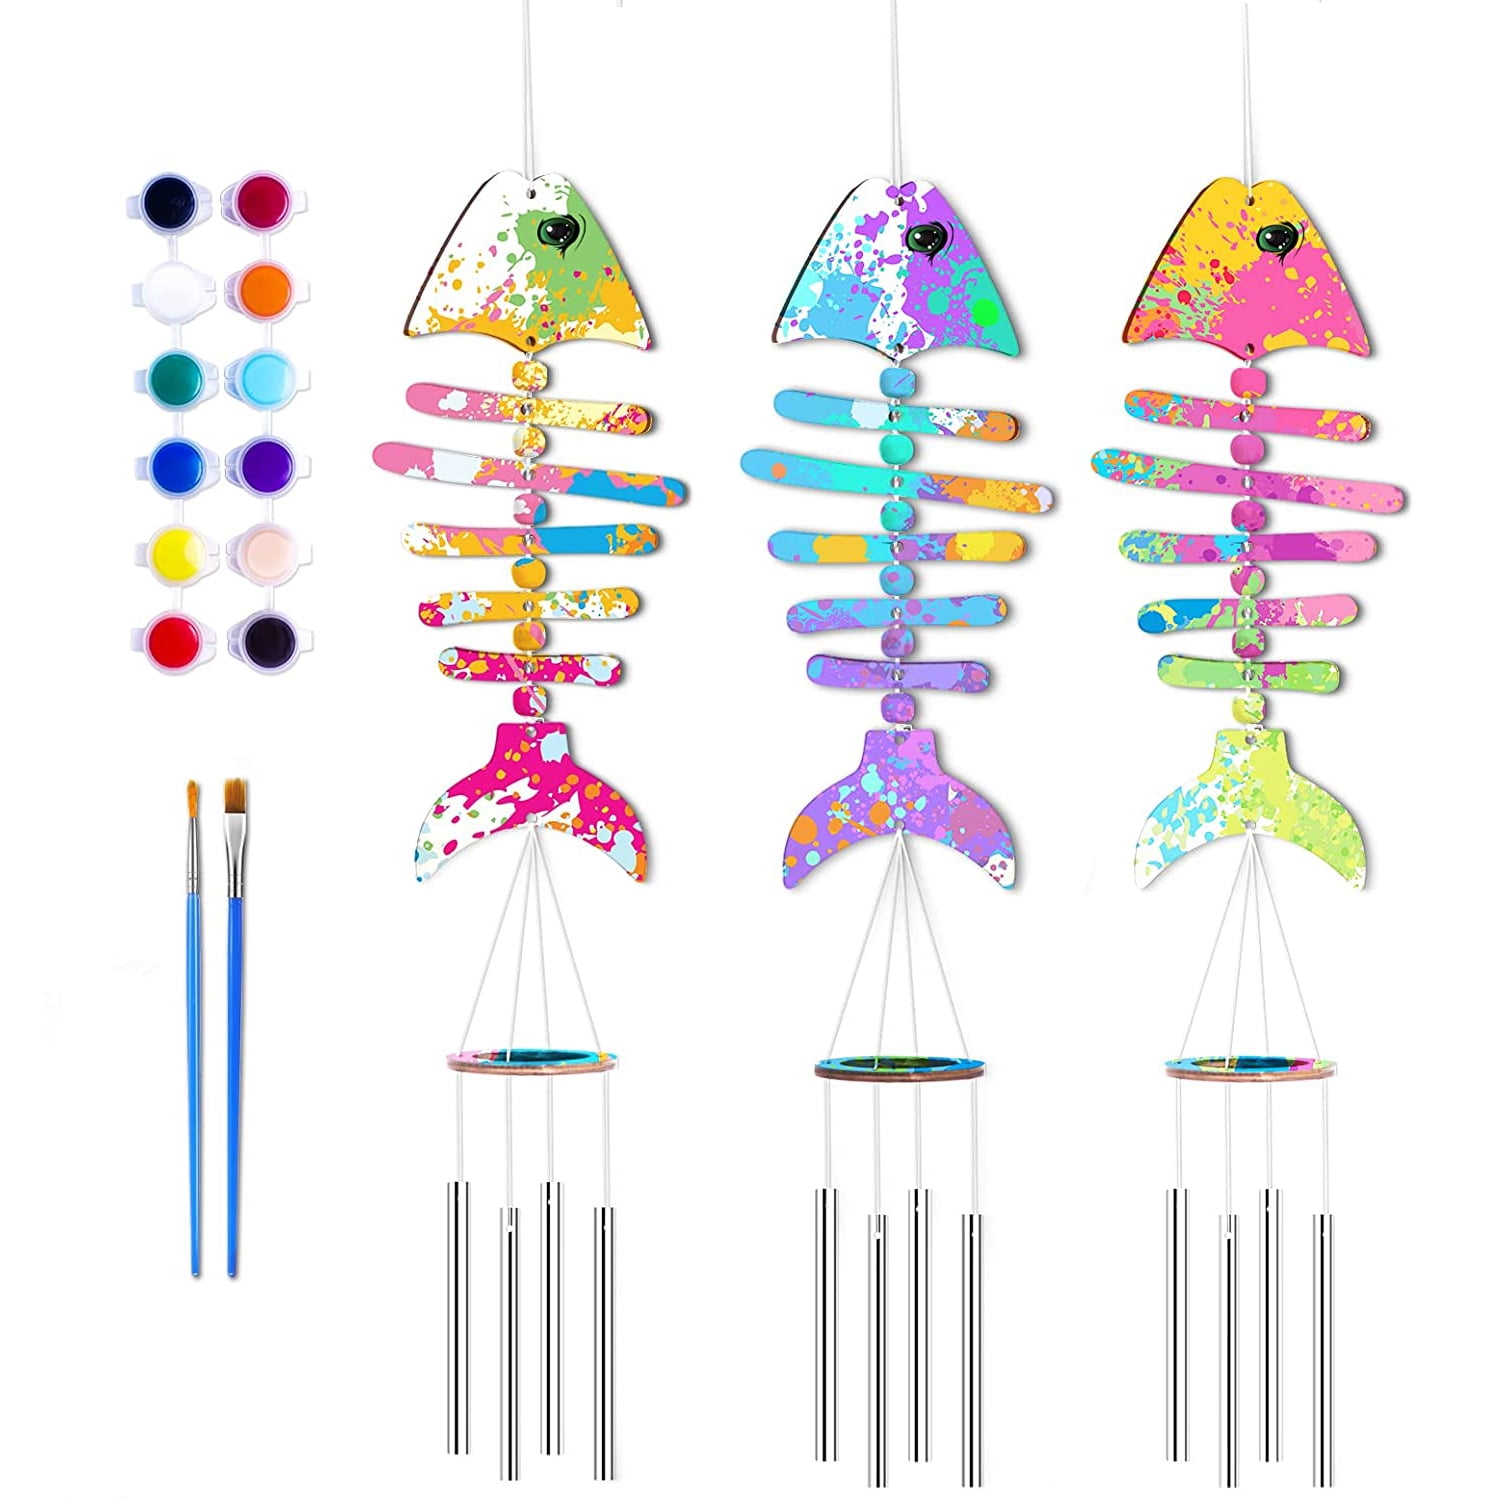 Arts and Crafts Supplies, Paint Your Own Wind Chime Kits, Arts and Crafts  for Kids, Toys for Girls Boys Ages 5 6 7 8 9 10 Years Old